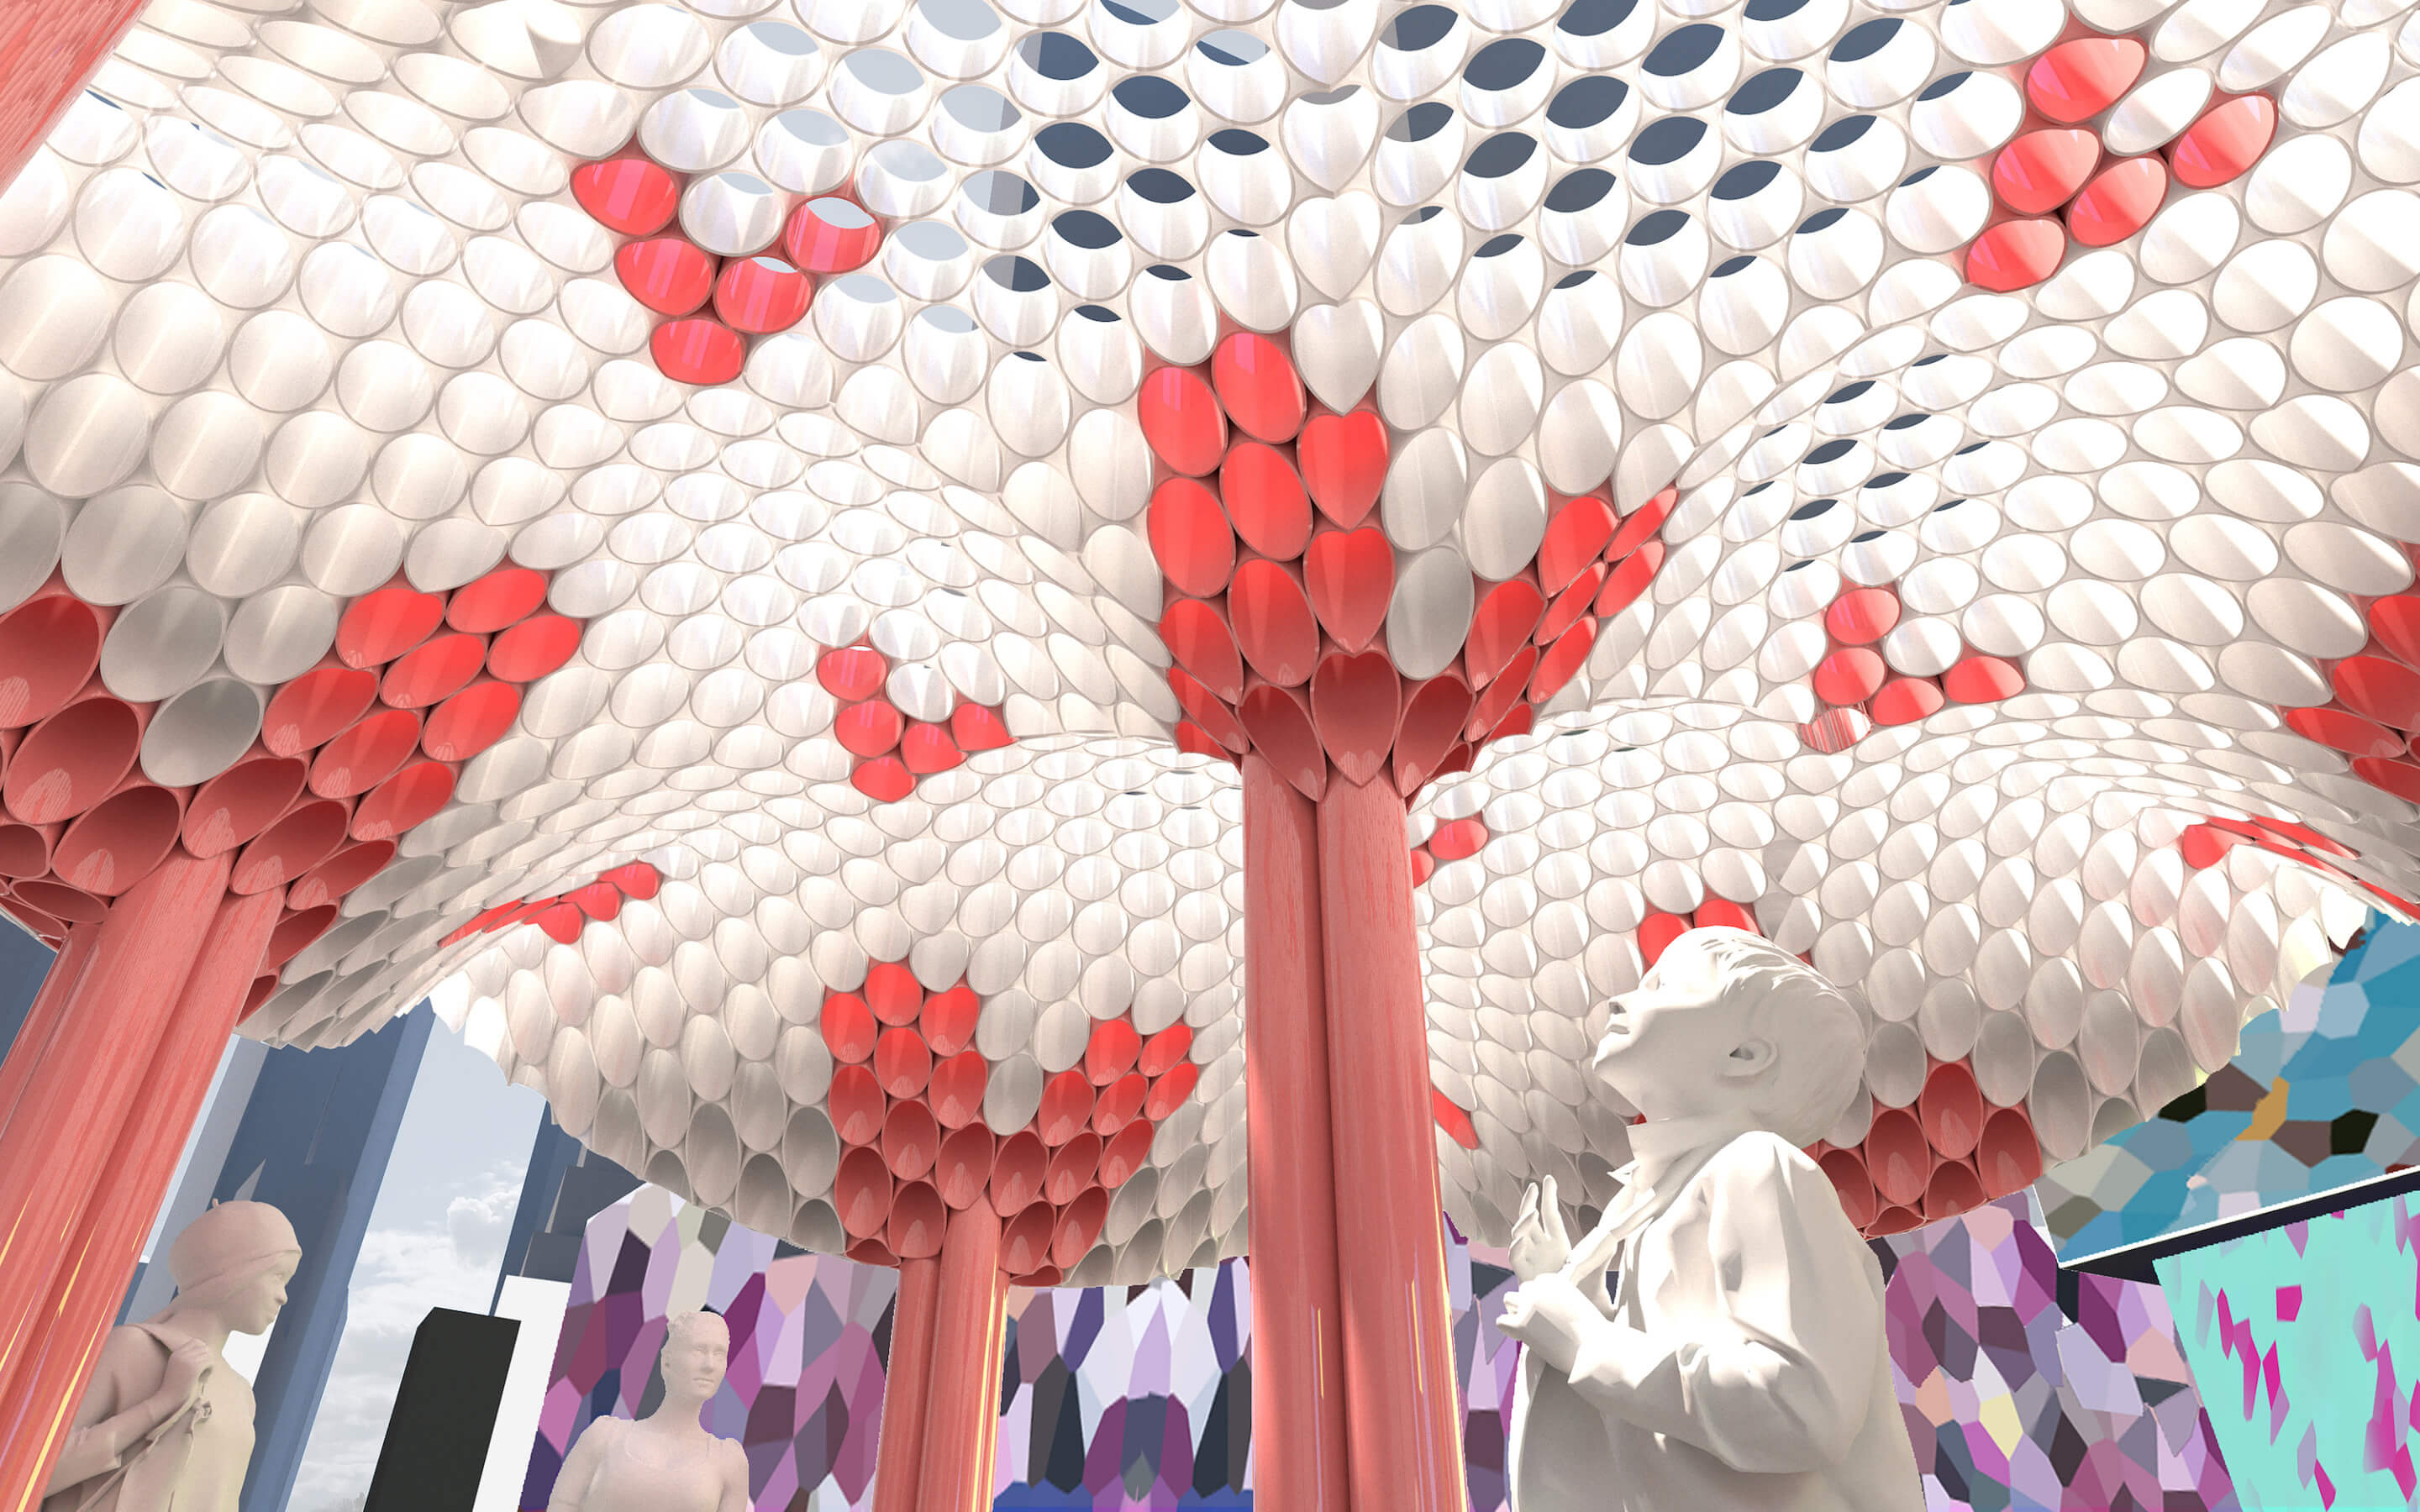 rendering of people gazing upwards at a roof structure made from pv pipe